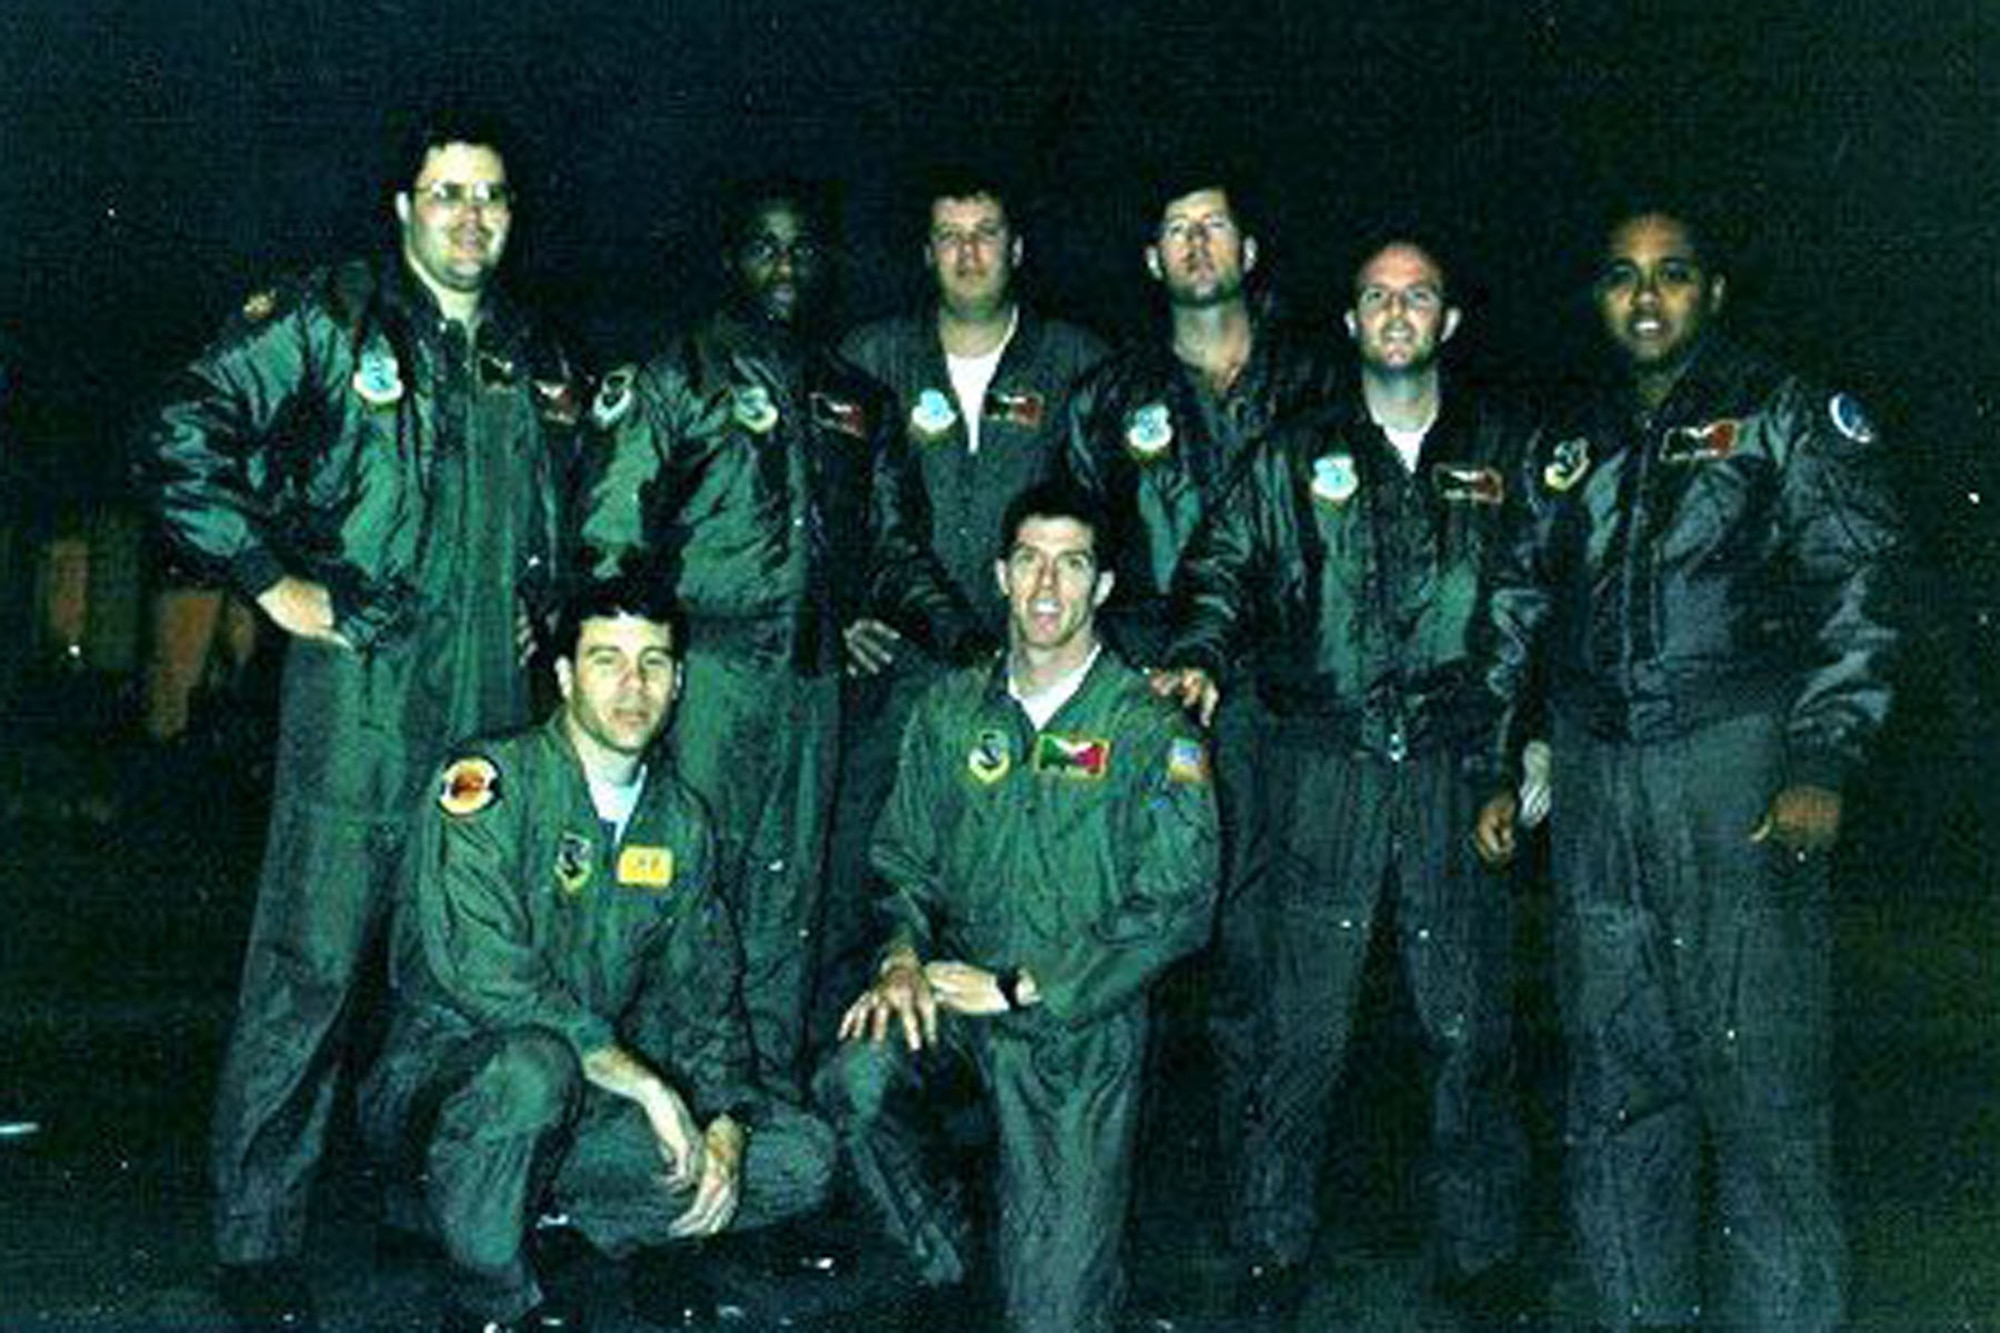 Aircrew members gather for a photo at Barksdale Air Force Base, La., before the mission that will fire the opening shots of OPERATION DESSERT STORM, Jan. 16, 1991. Standing - Capt. Scott Ladner, radar navigator, 596th Bomb Squadron, 1st Lt. Michael Branche - co-pilot 596th BS, Senior Airman Guy Modgling, gunner, 596th BS, Capt. Steve Bass, pilot, 596th BS, Capt. Bernie Morgan, pilot, 596th BS, and 1st Lt. Andre Mouton, navigator, 596th BS. Kneeling - Maj. Wes Bain, radar navigator, 49th Test Squadron, and Capt. Trey Morriss, electronic warfare officer, 596th BS. Some of the Airmen who participated in the historic mission gathered recently in Bossier City, La., to commemorate the event. (Courtesy photo)

